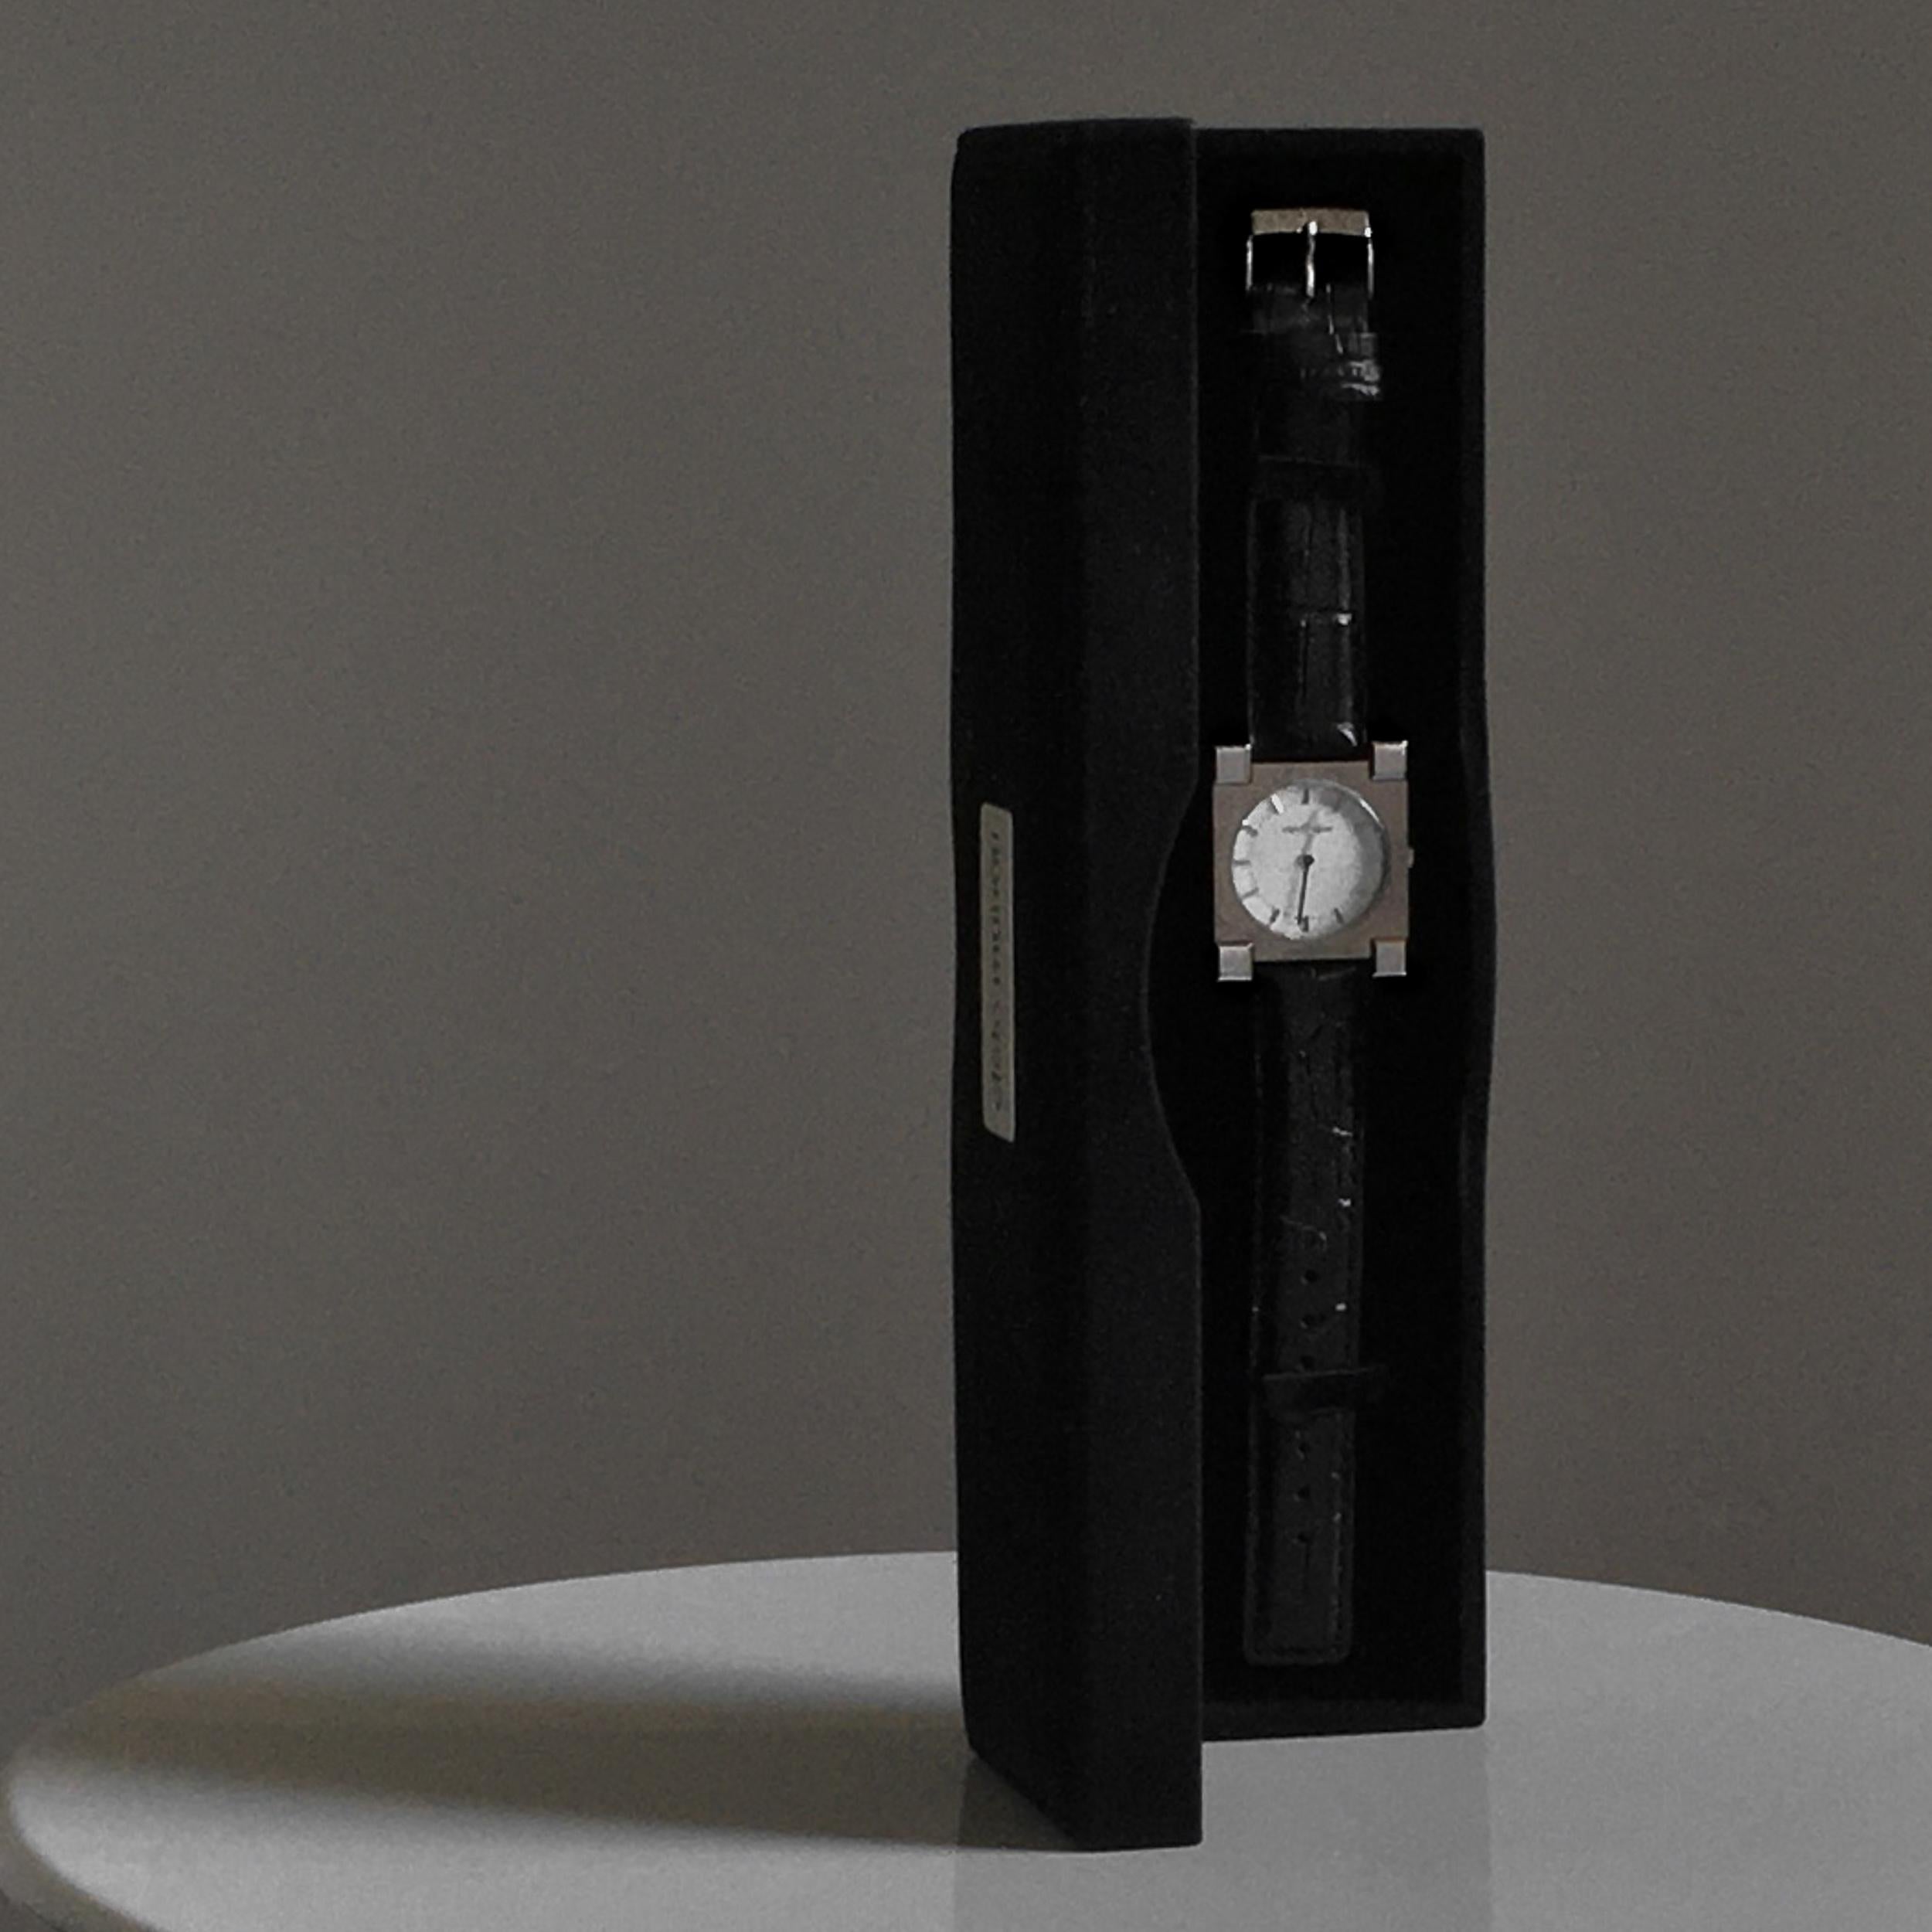 Watch designed by Ettore Sottsass

This watch, which takes part in the Permanent Collection at “The Metropolitan Museum of Art” in New York, epitomizes the life of the great architect Ettore Sottsass: his life has been masterly been spent in a